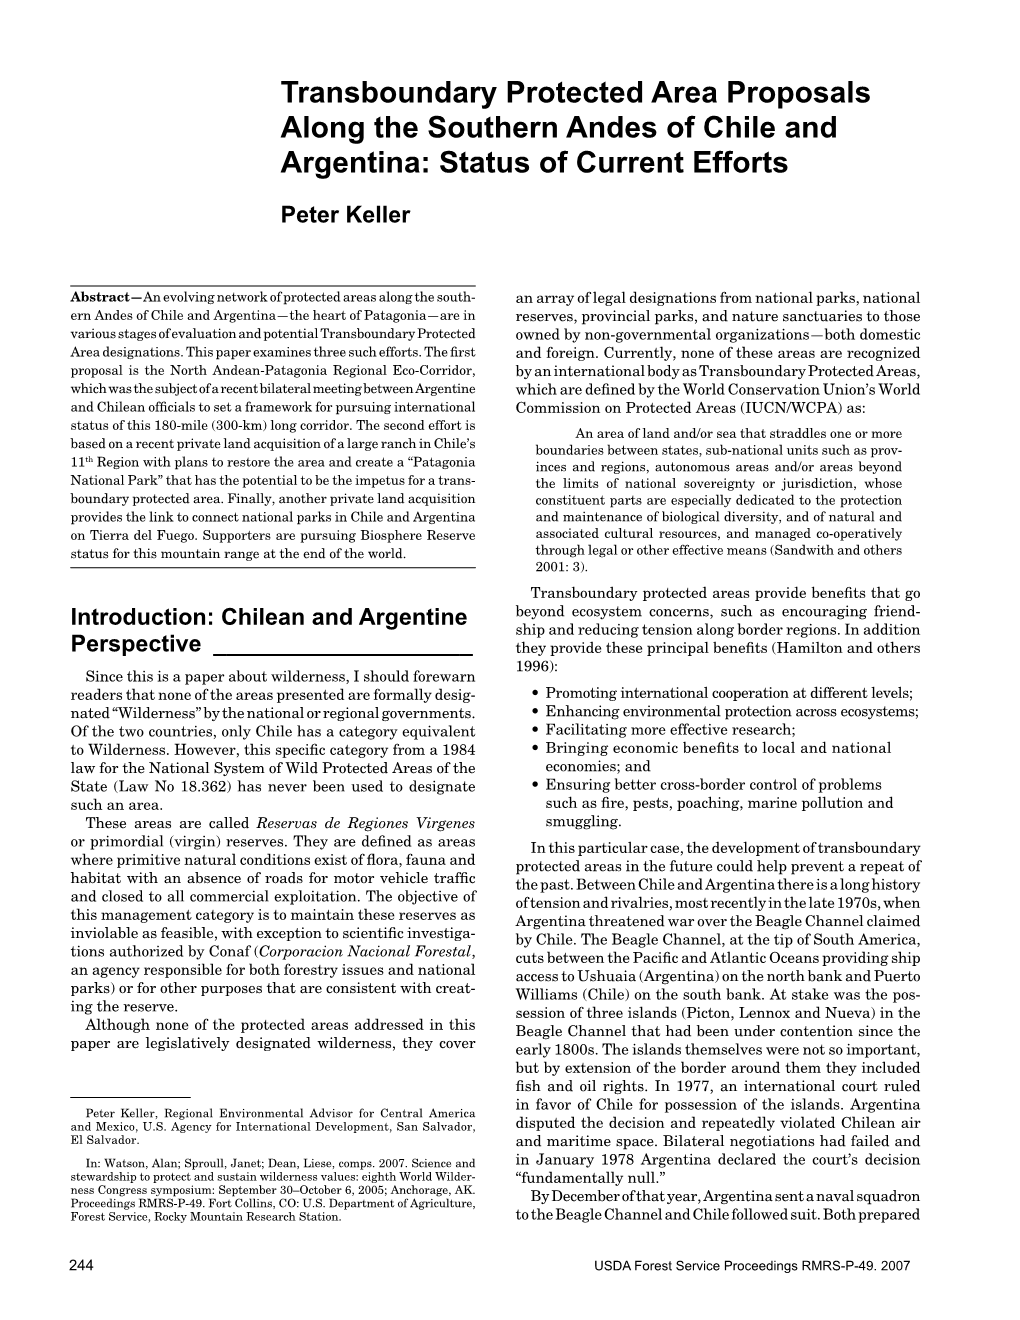 Transboundary Protected Area Proposals Along the Southern Andes of Chile and Argentina: Status of Current Efforts